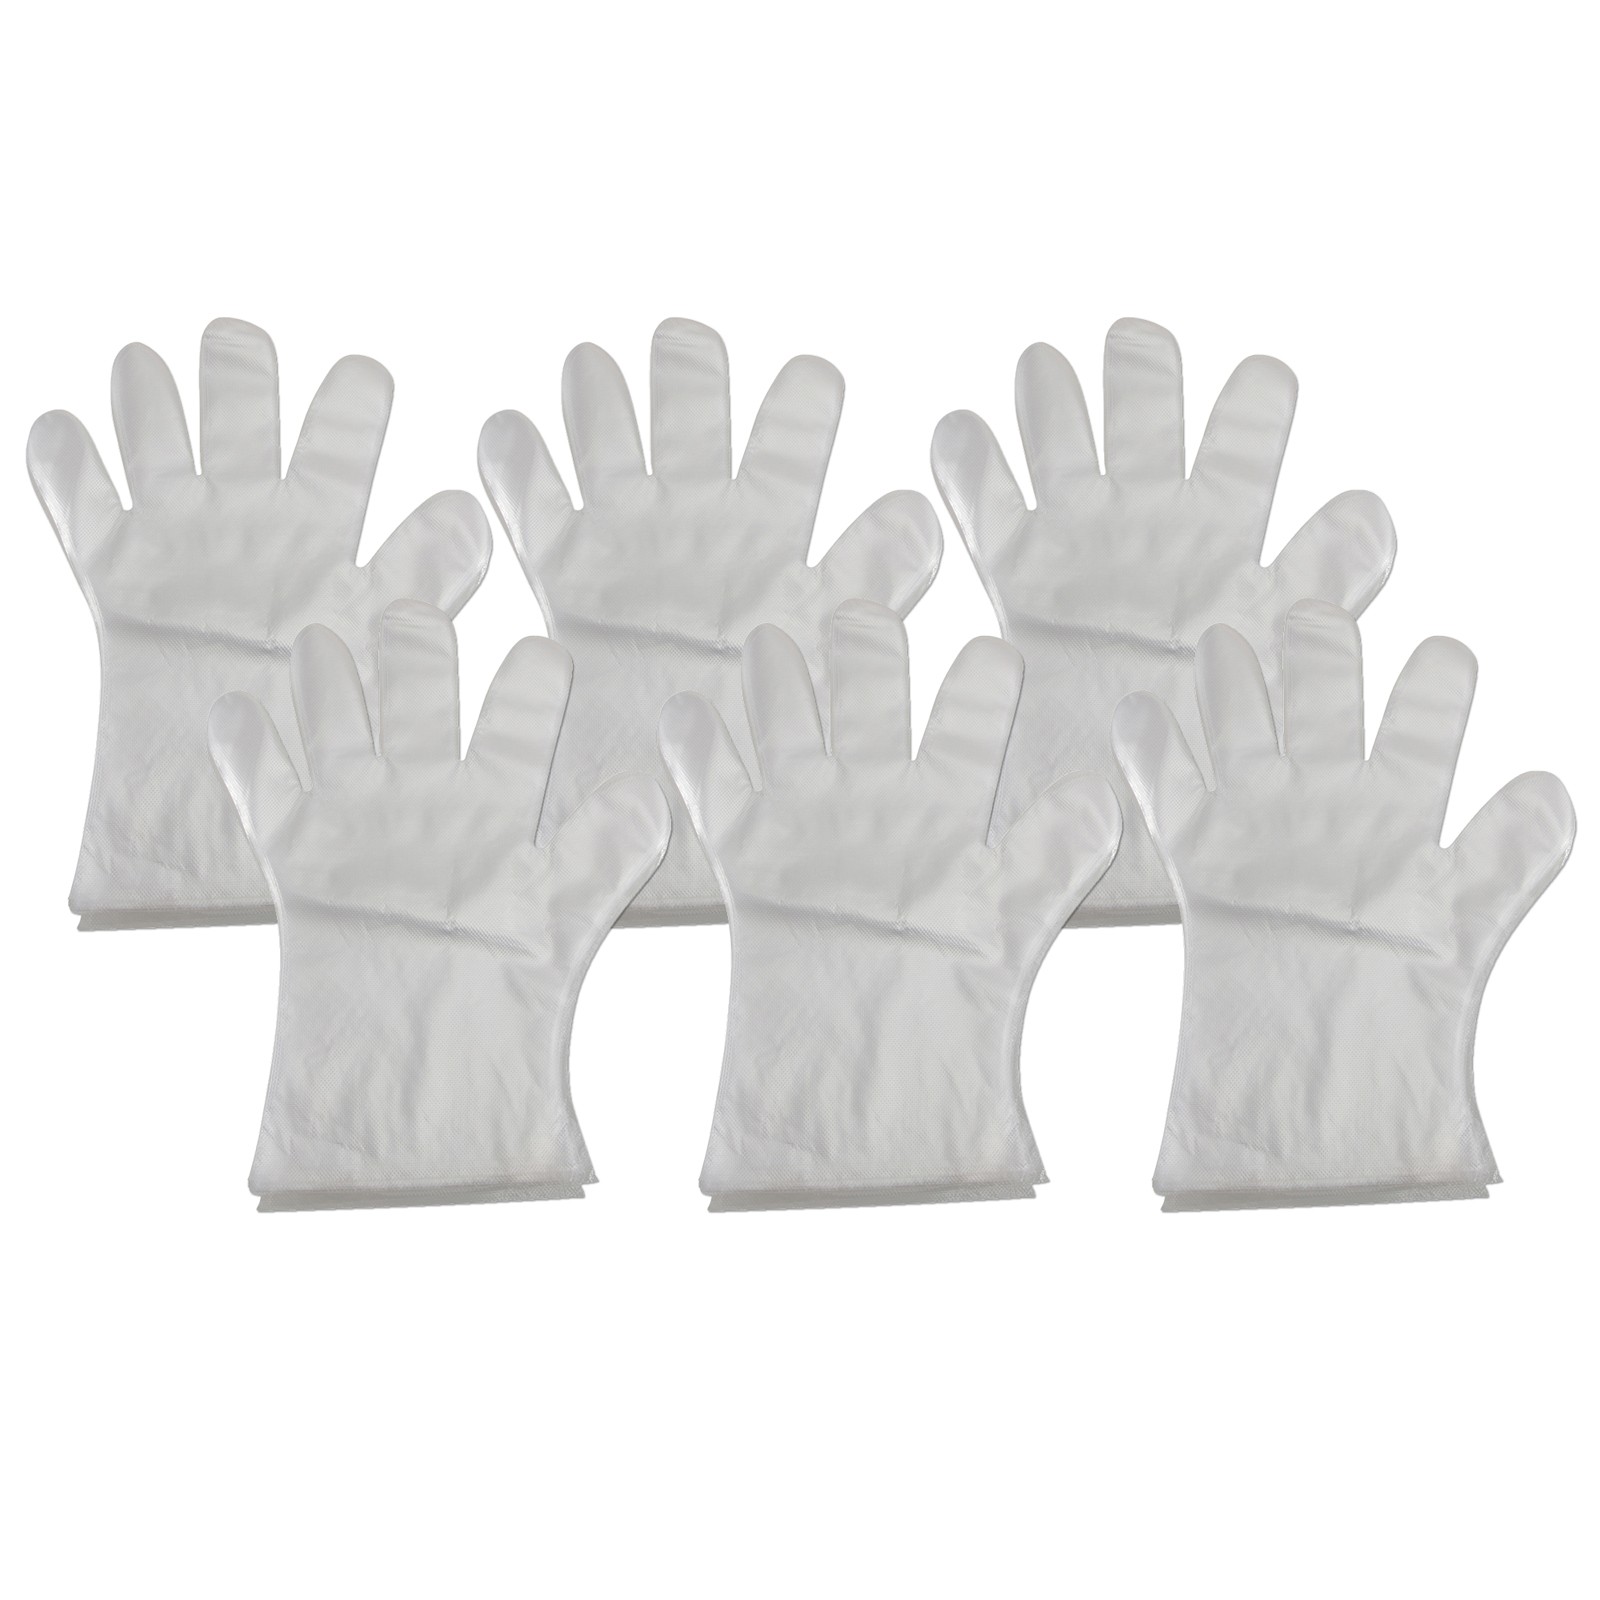 Disposable Gloves S/M, 100 Per Pack, 6 Packs